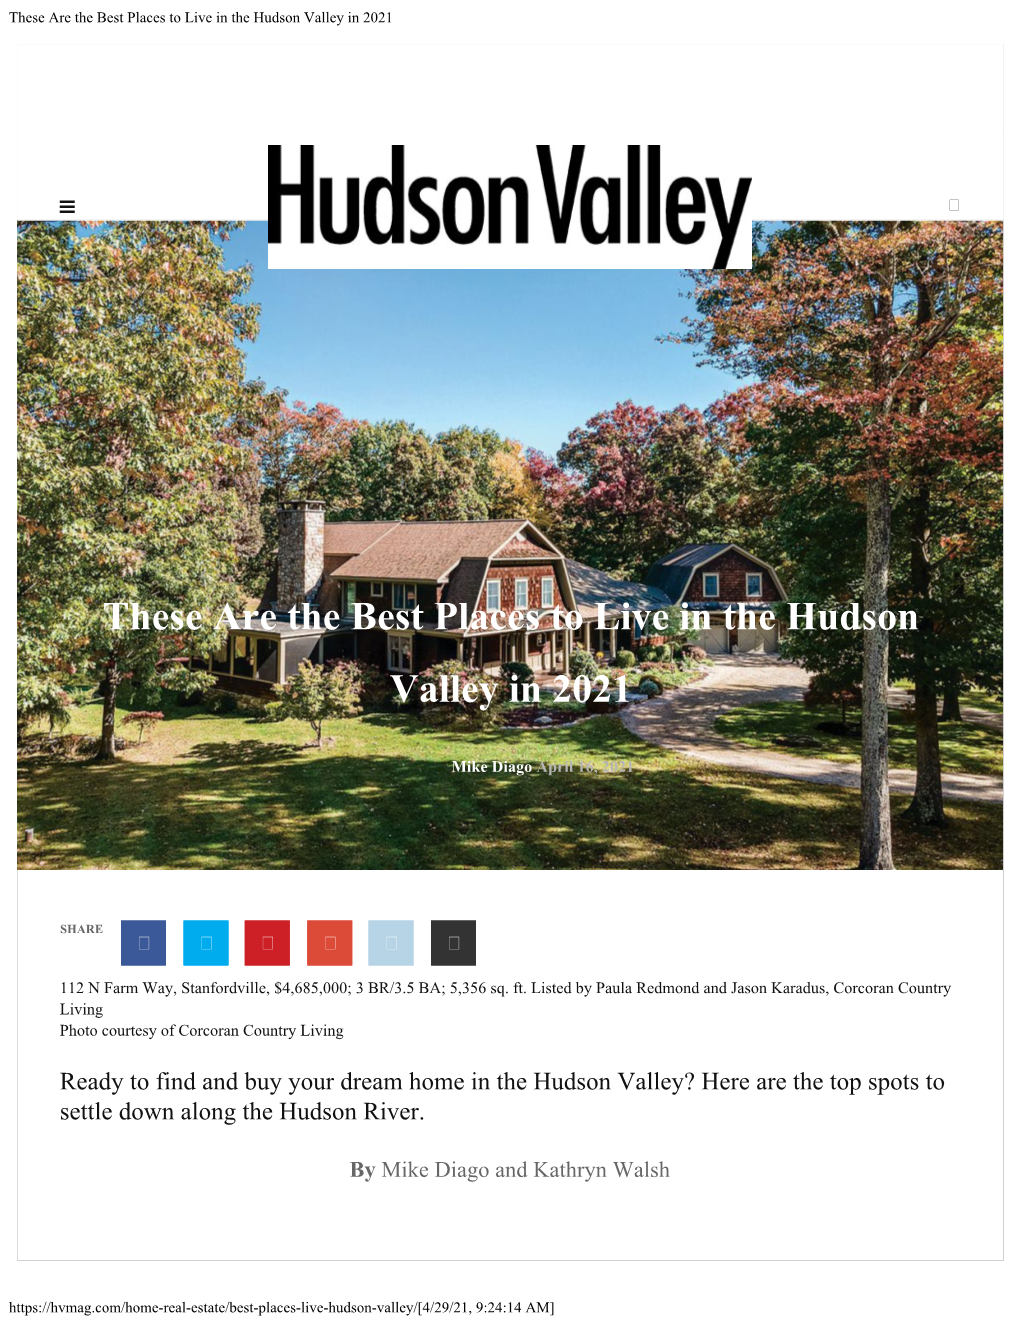 These Are the Best Places to Live in the Hudson Valley in 2021